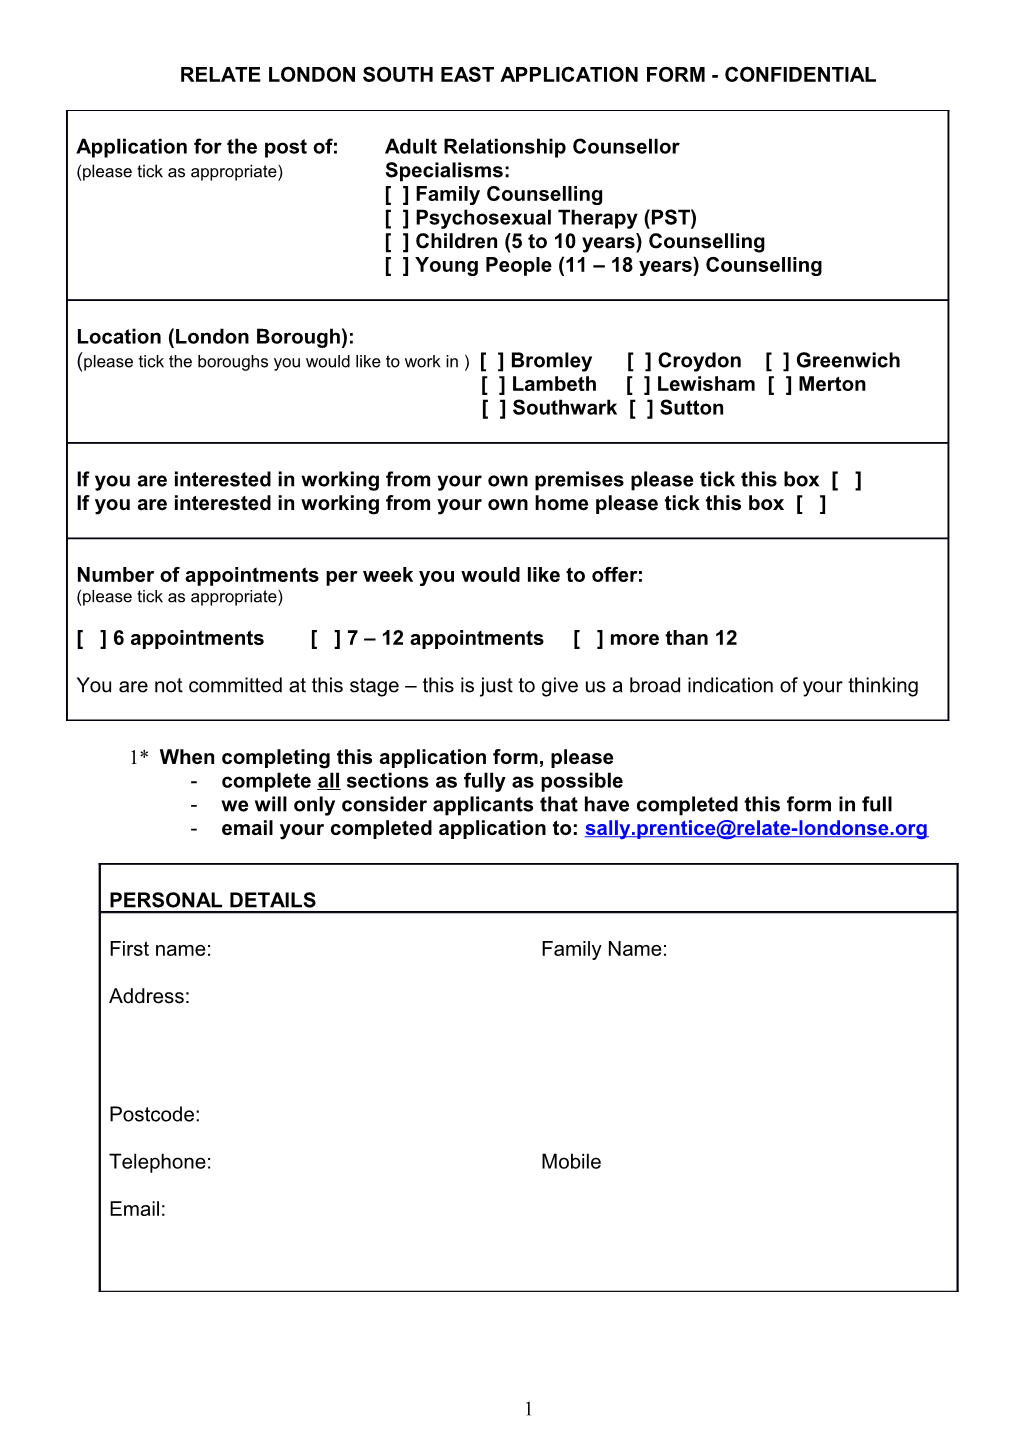 Relate London South East Application Form - Confidential